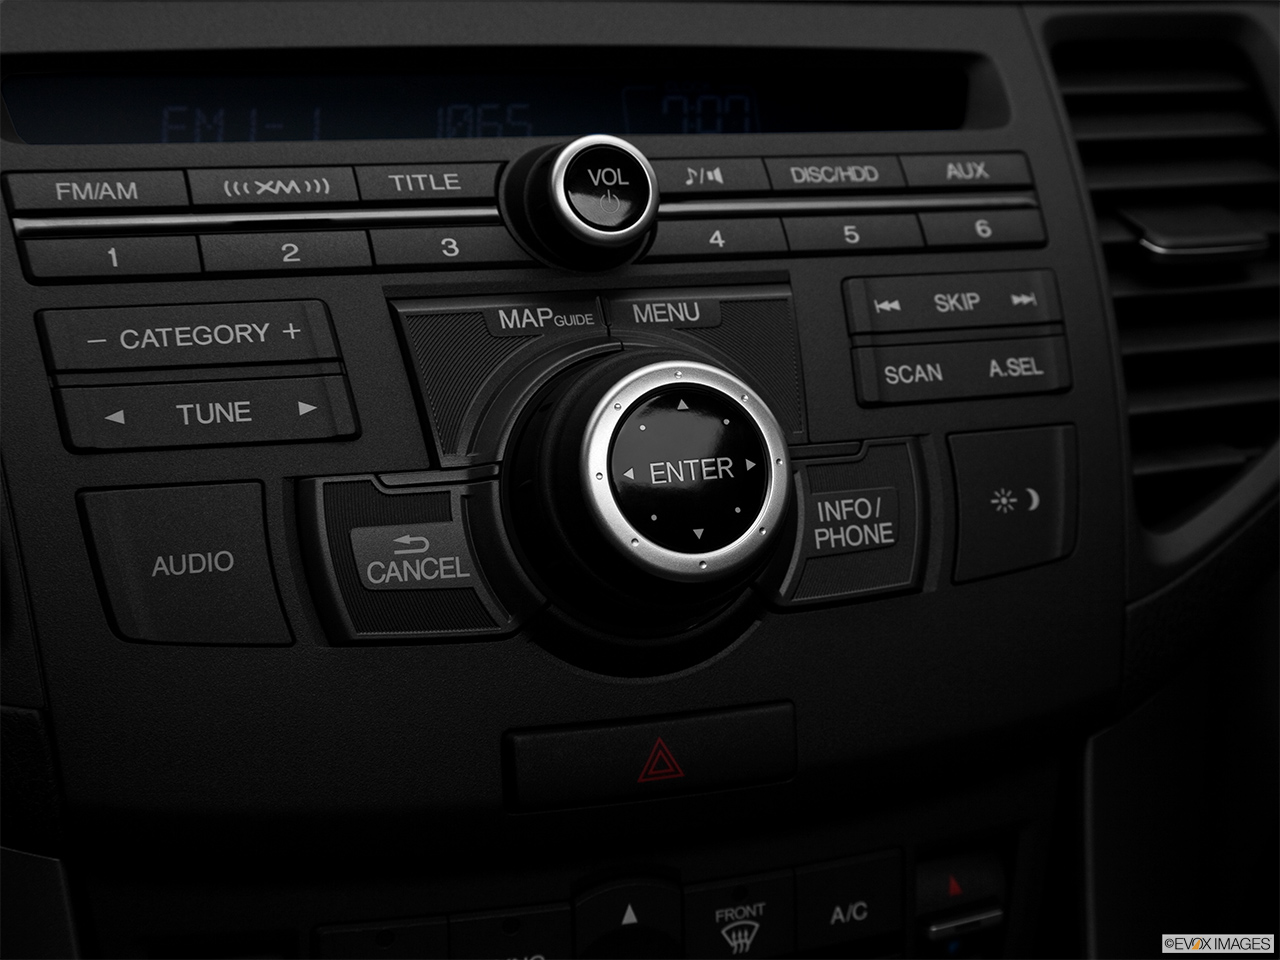 2012 Acura TSX 5-Speed Automatic System Controls. 